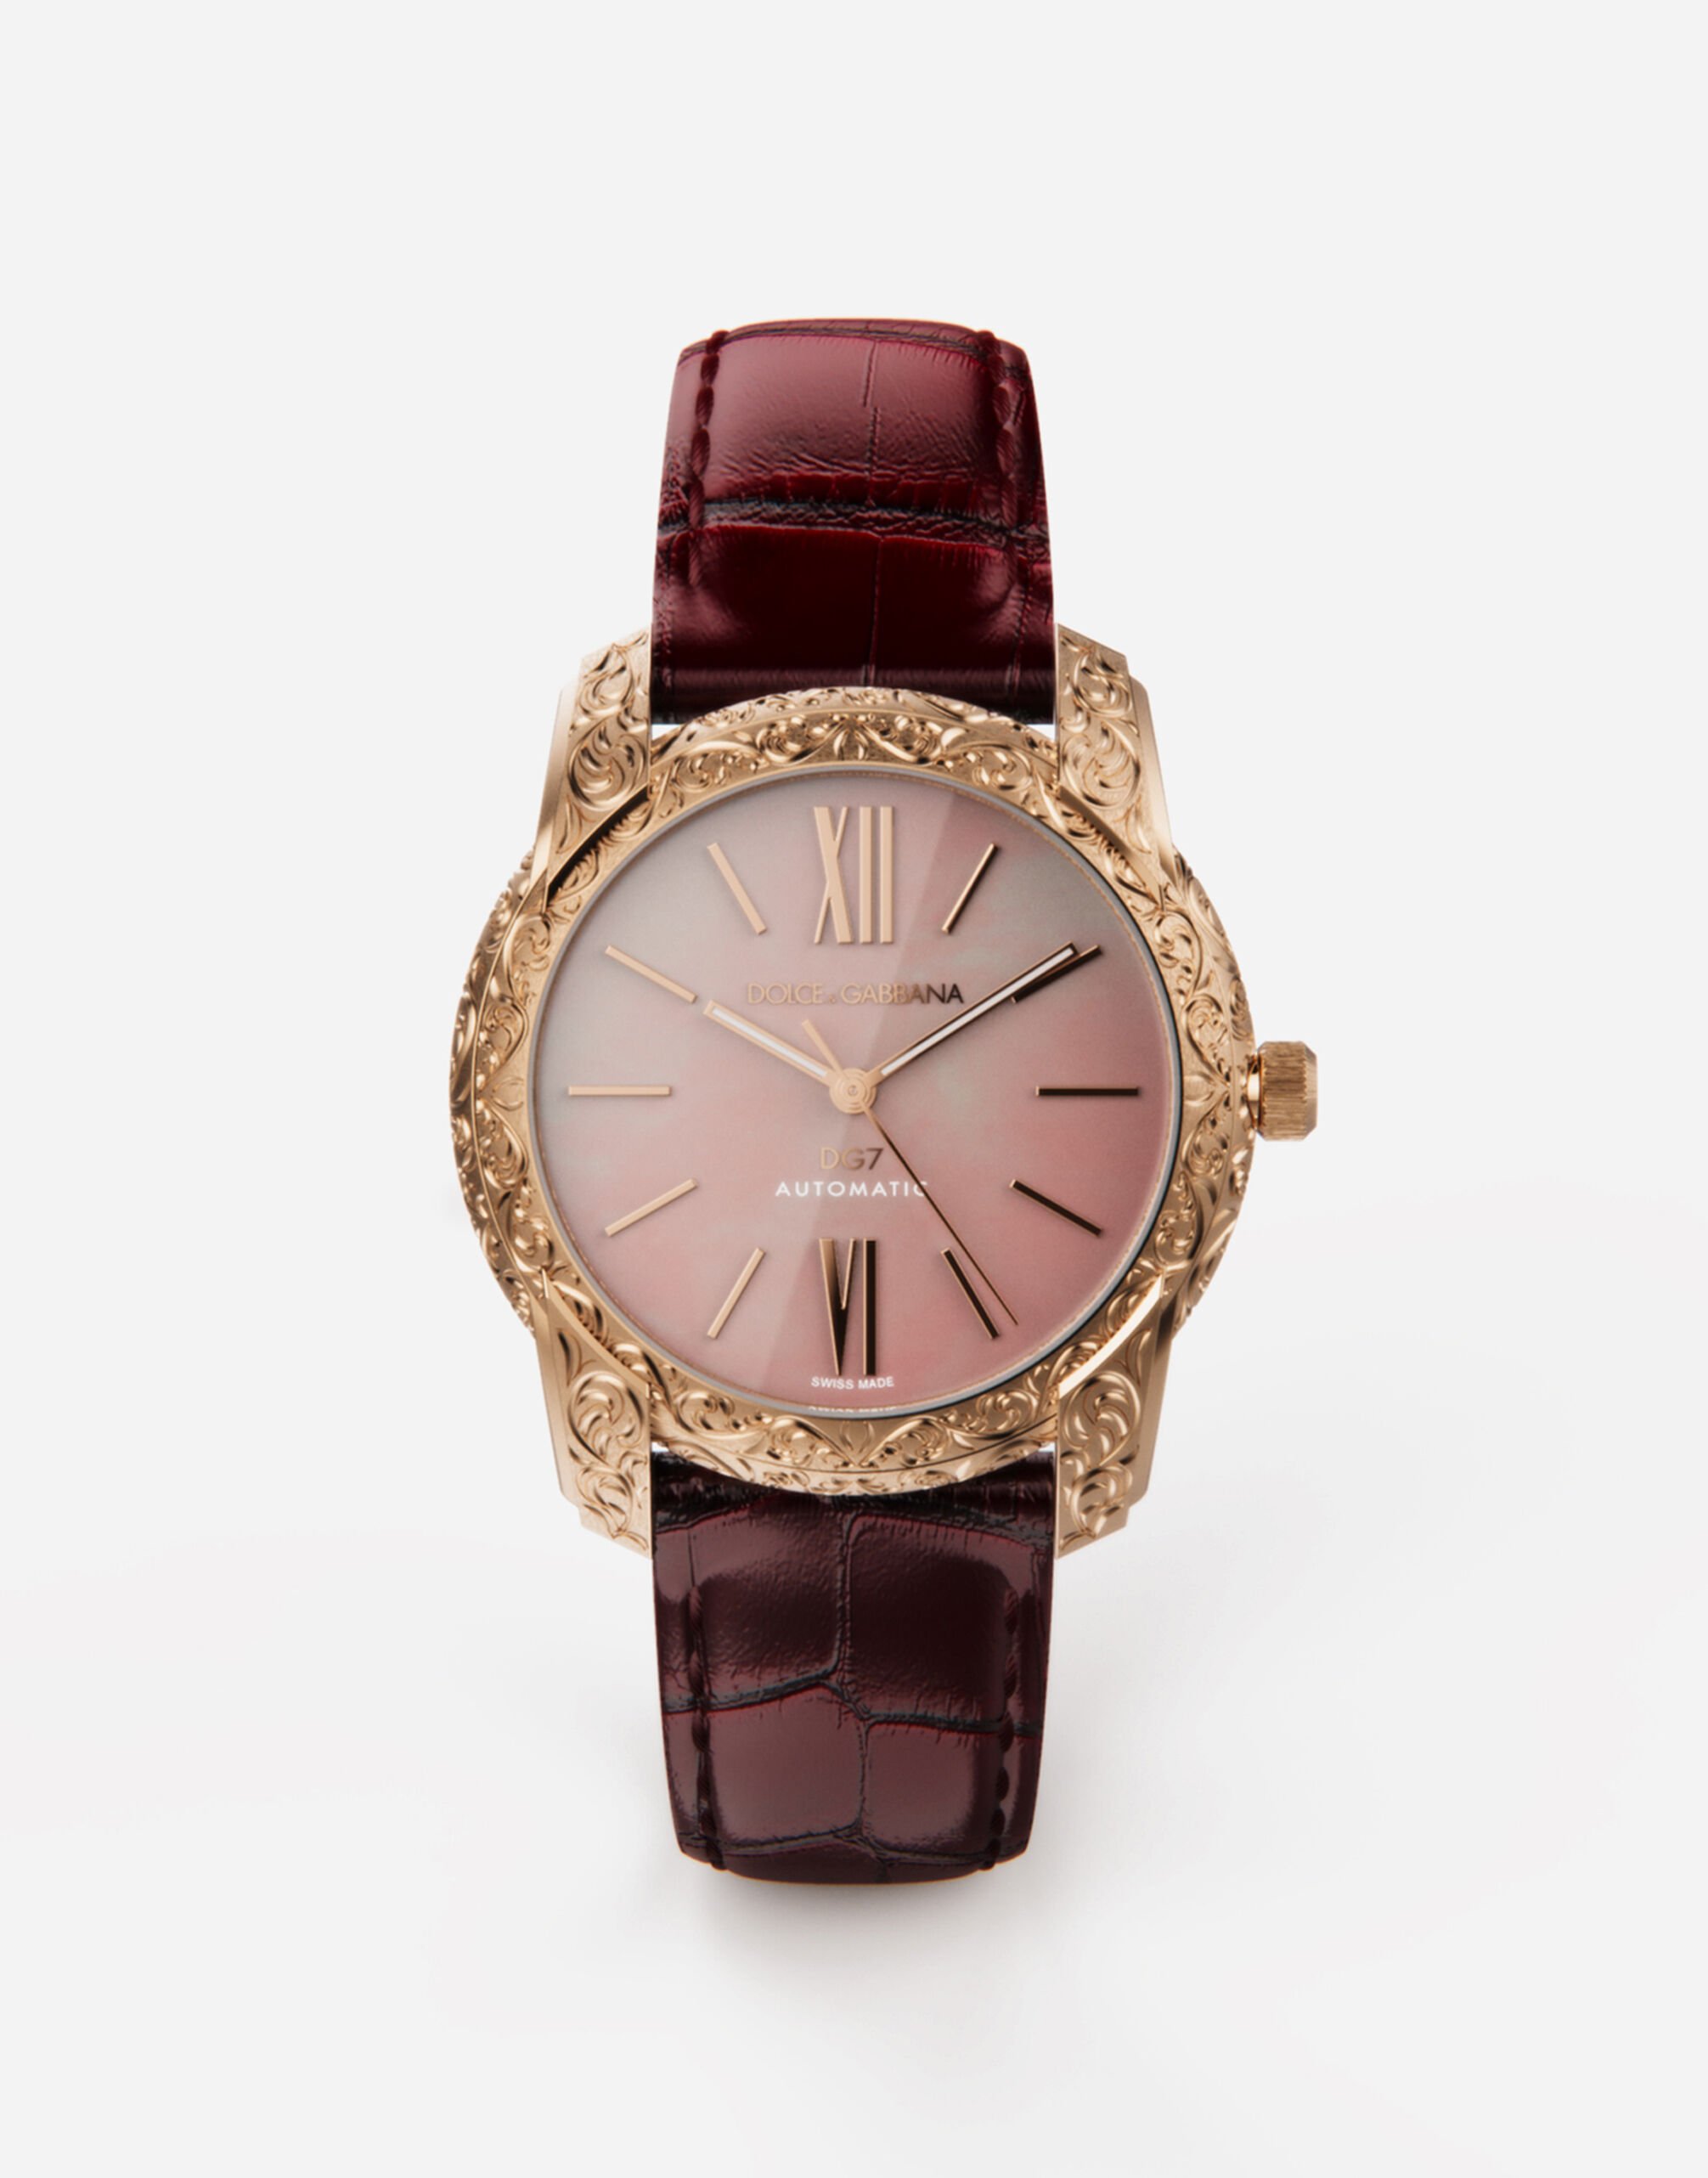 Dolce & Gabbana DG7 Gattopardo watch in red gold with pink mother of pearl Gold WRLK1GWJAS1